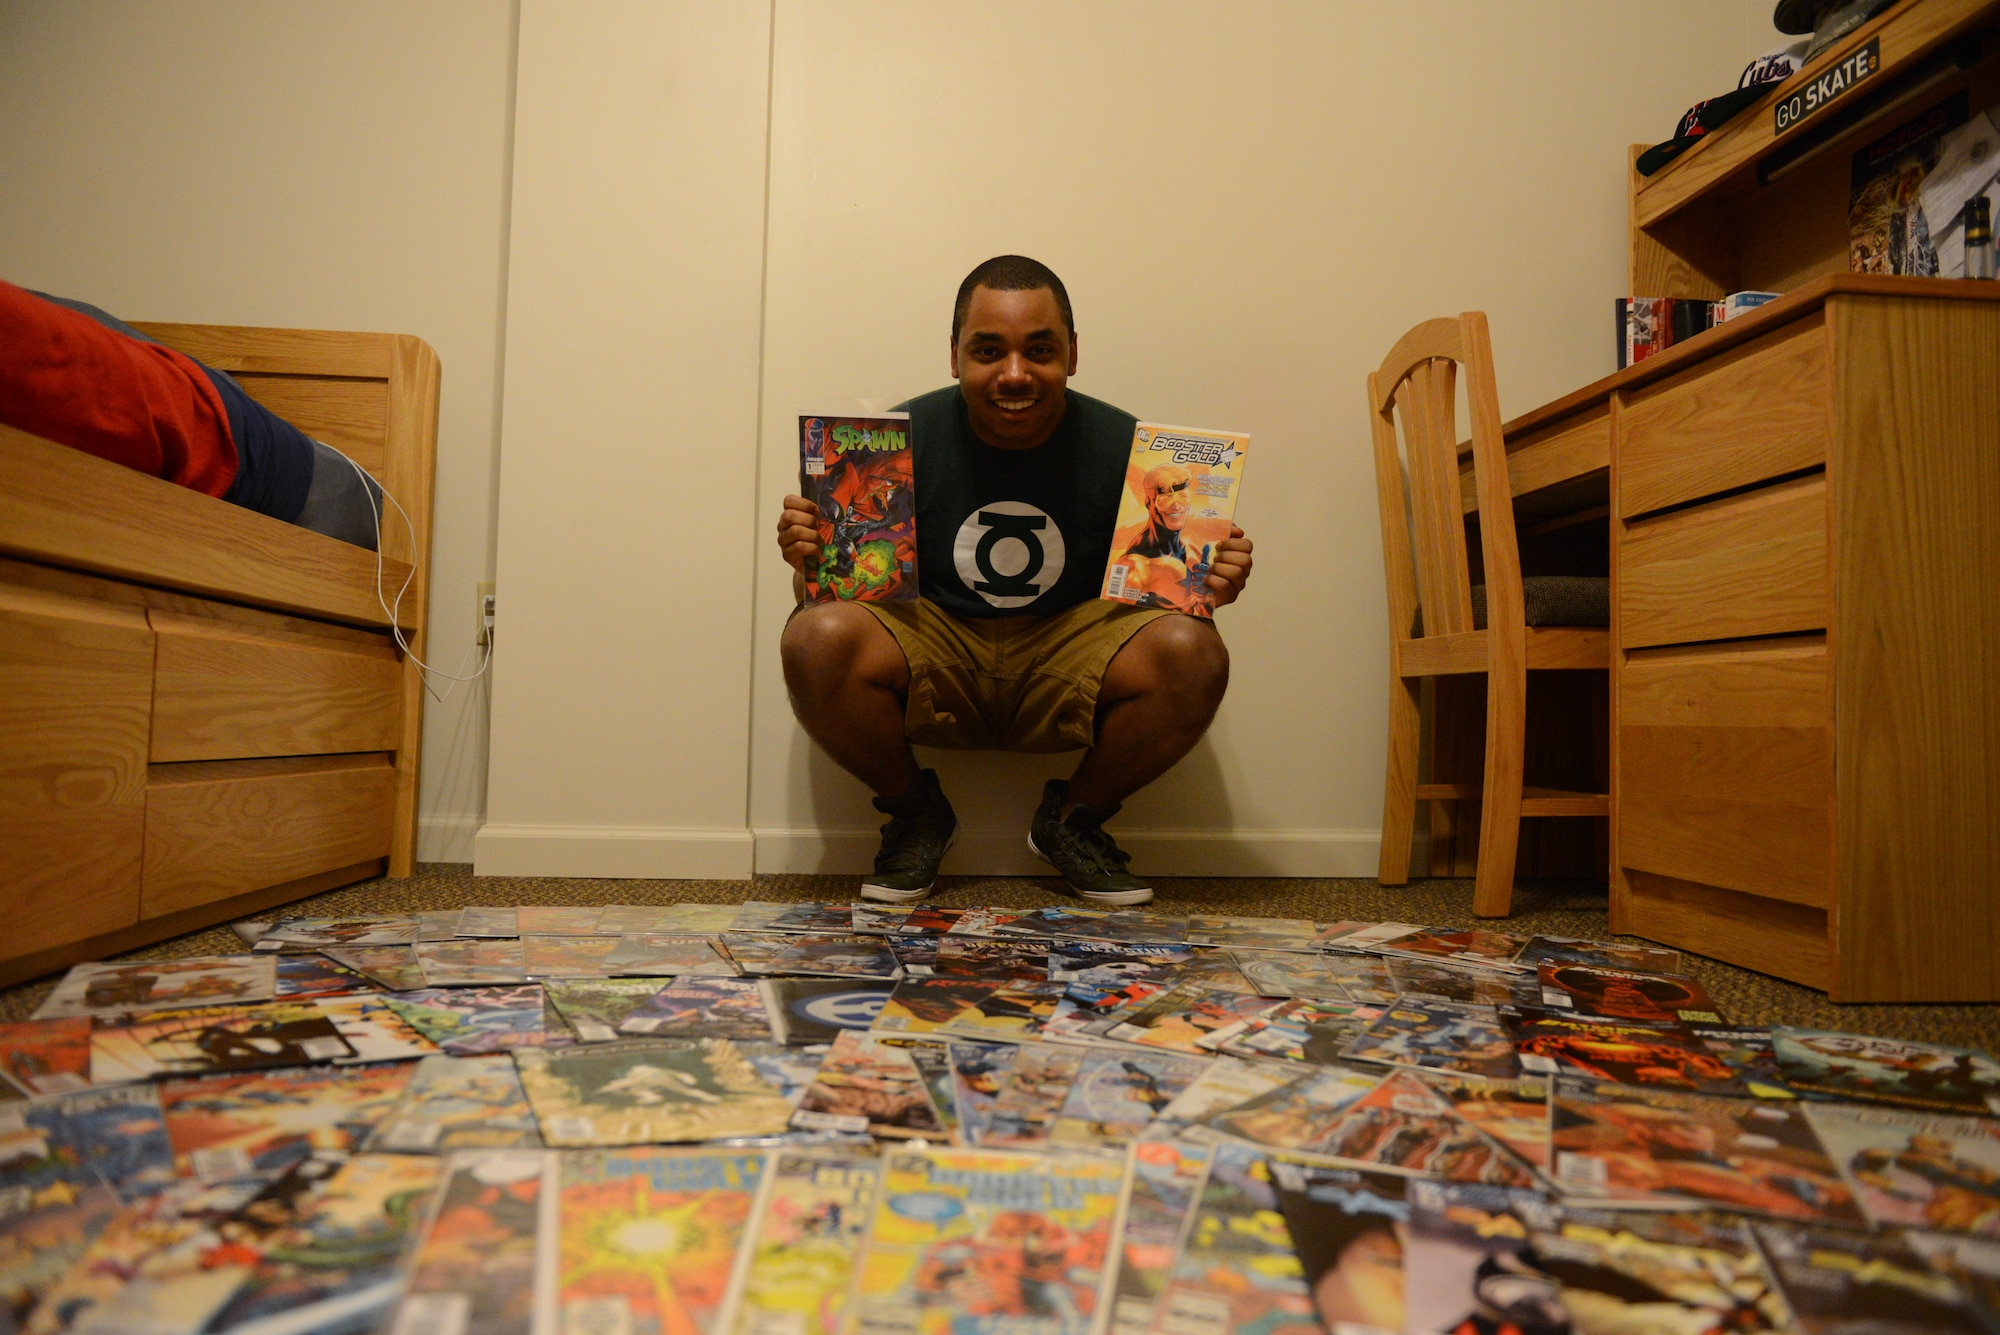 Airman 1st Class Jeremy Evans, 375th Communication Squadron, sorts through his comic book collection Monday in his dorm room at Scott Air Force Base.  Evans has an extensive collection of more than 1,000 comic books. (U.S. Air Force photo/Airman 1st Class Jake Eckhardt)